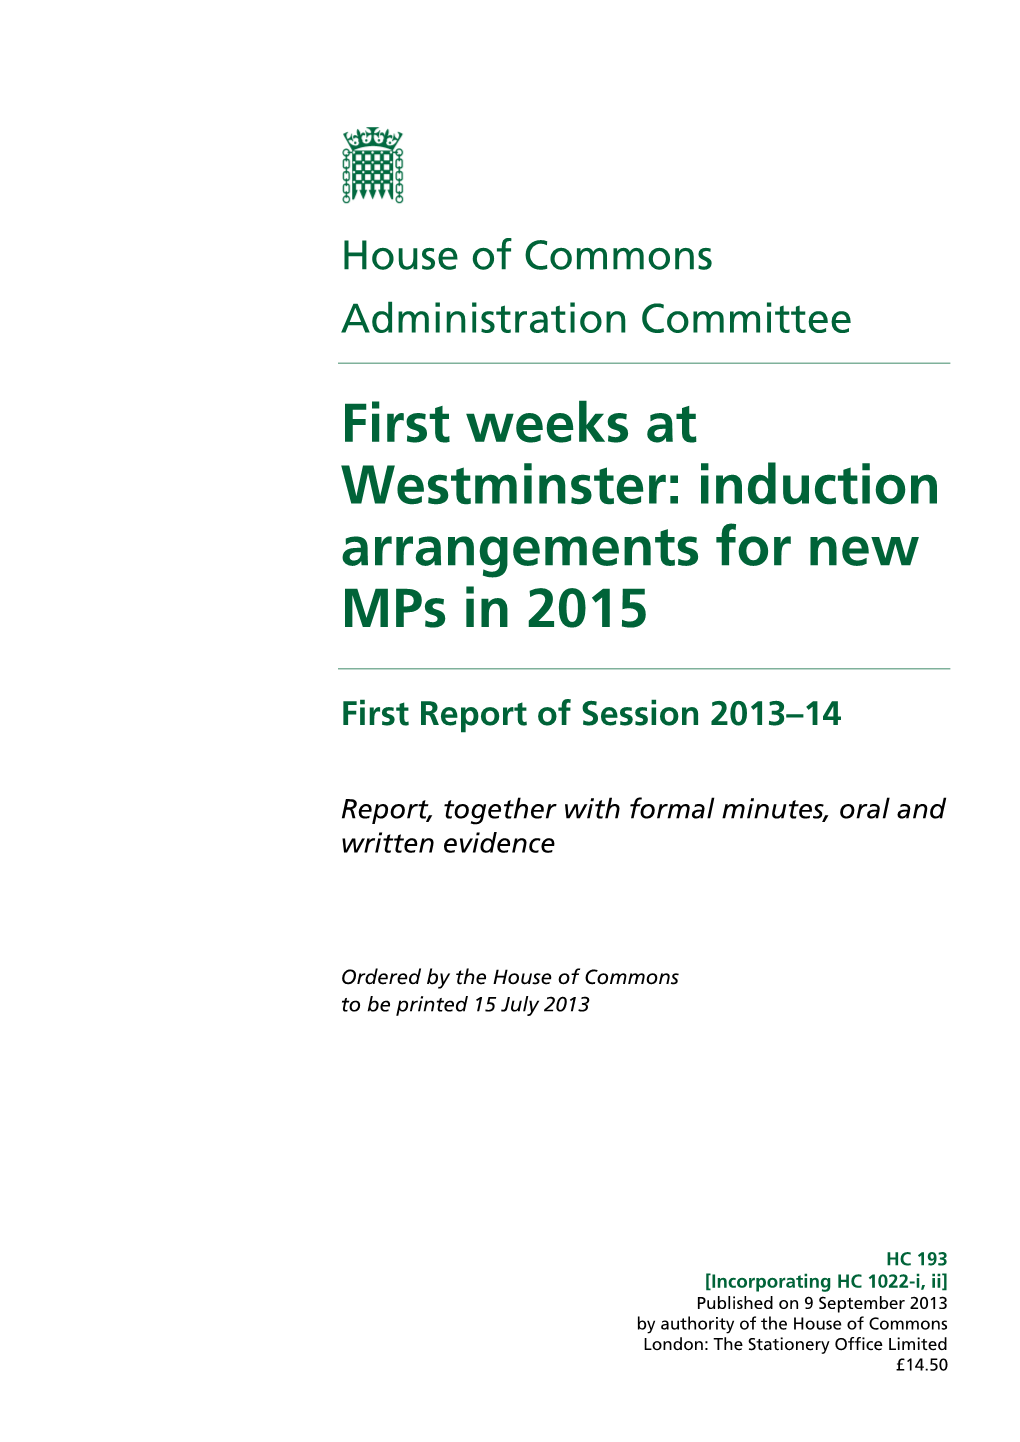 Induction Arrangements for New Mps in 2015